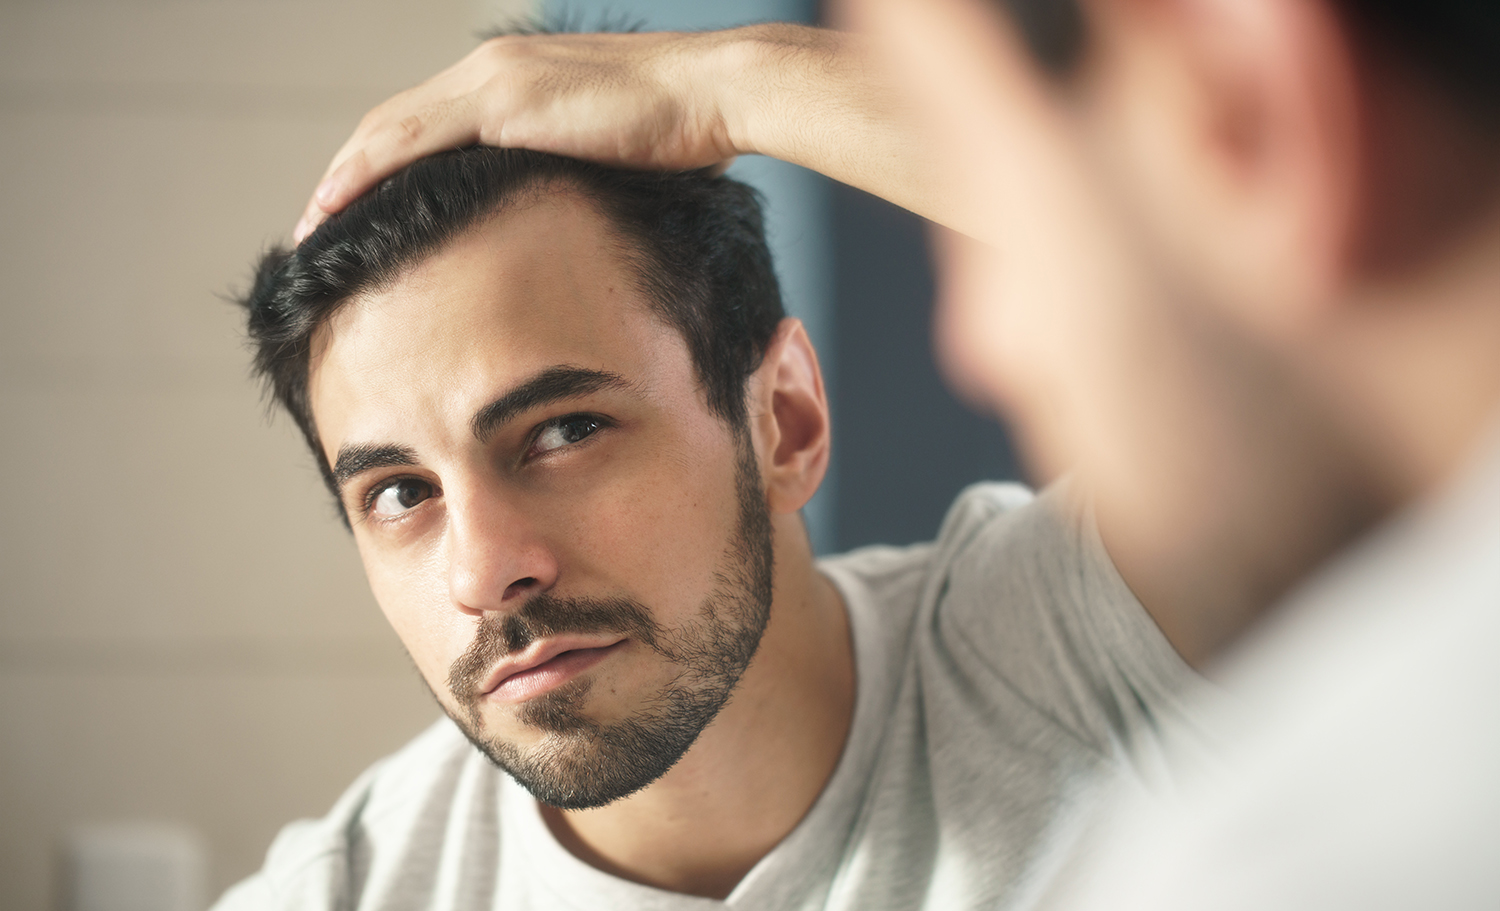 Man looking at his receding hairline in the mirror.